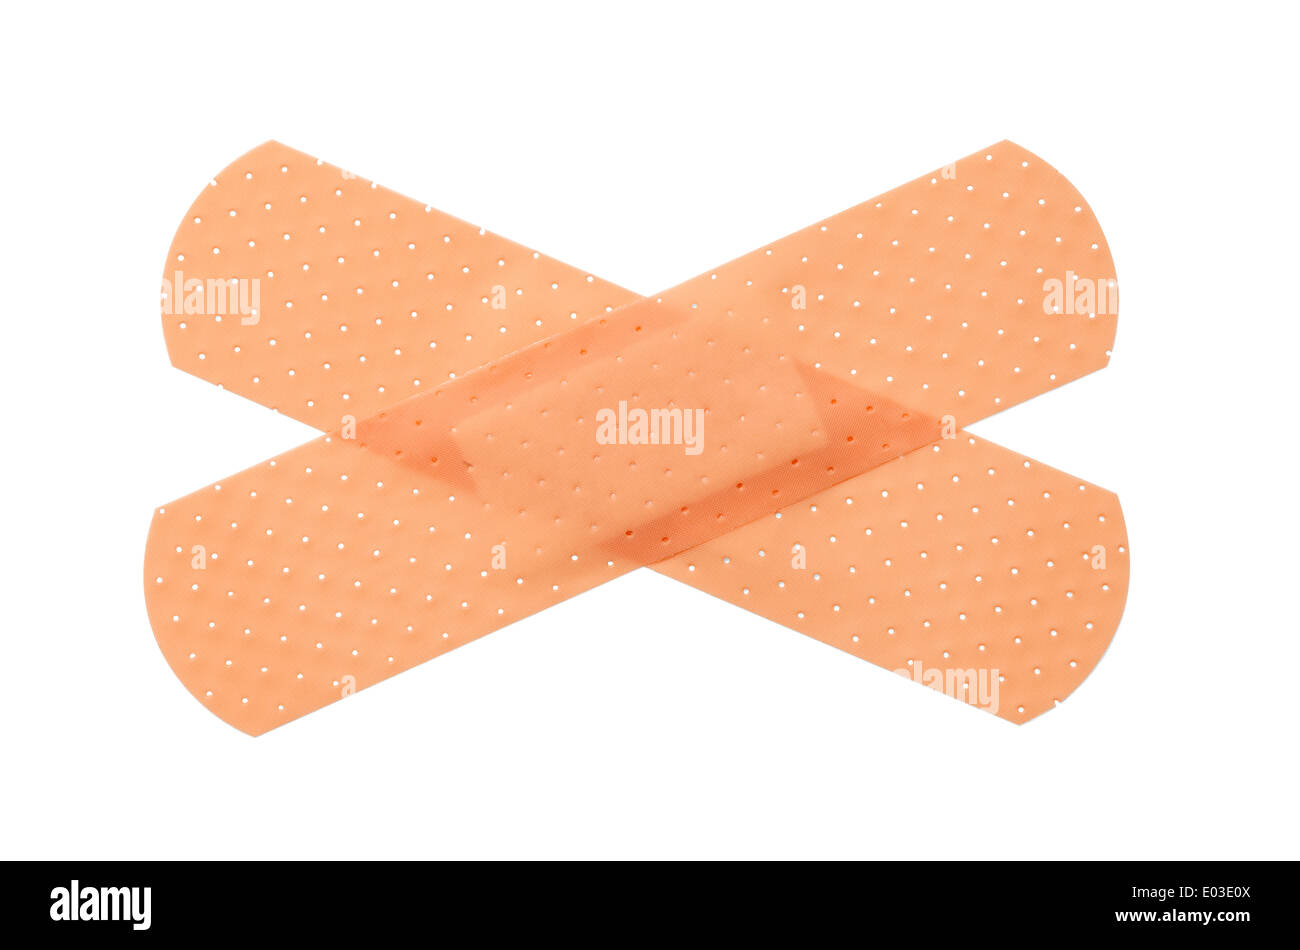 Bandages criss crossing isolated on a white background. Stock Photo